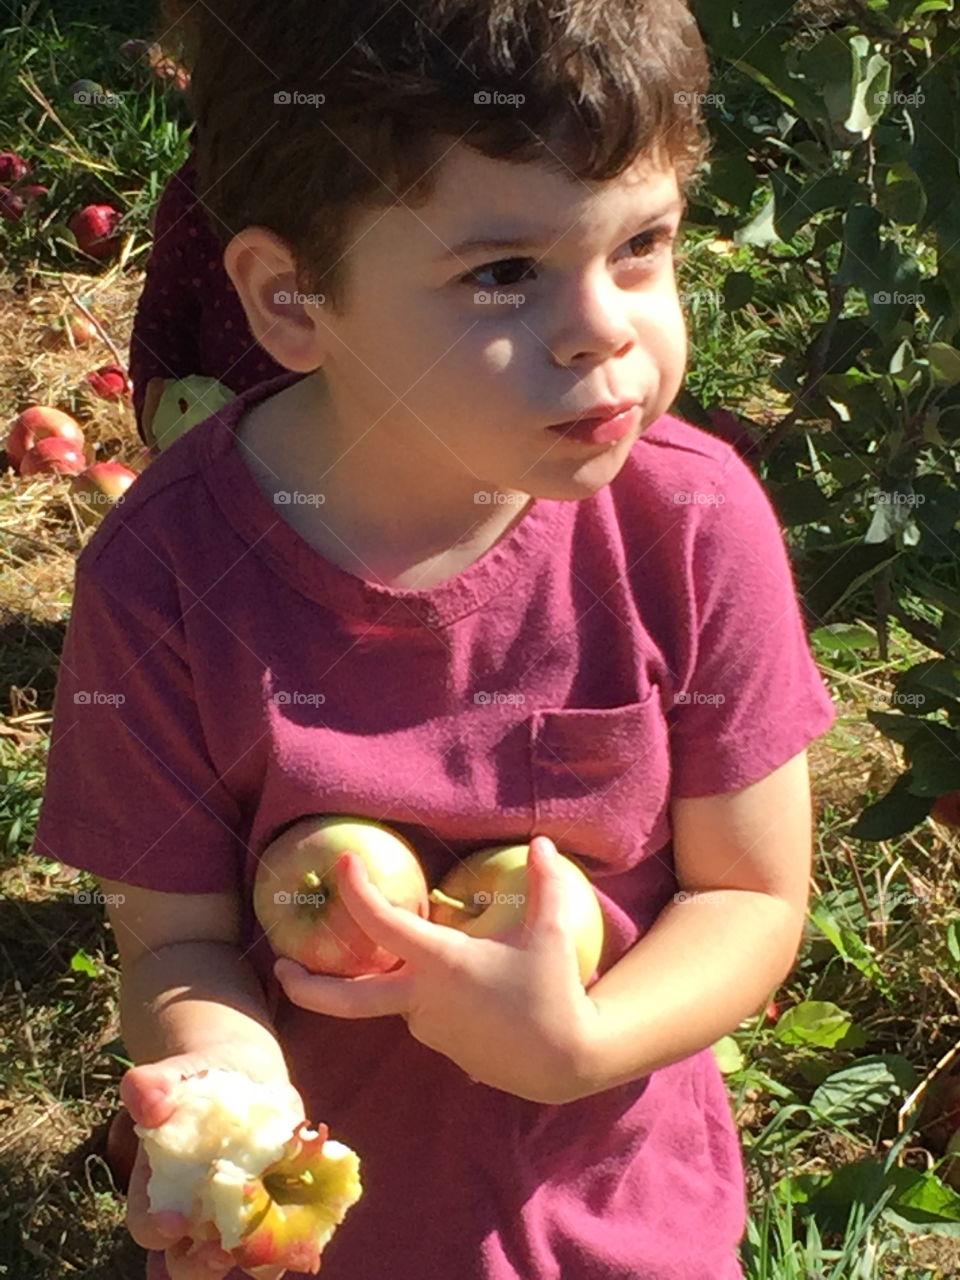 Small boy eating apples